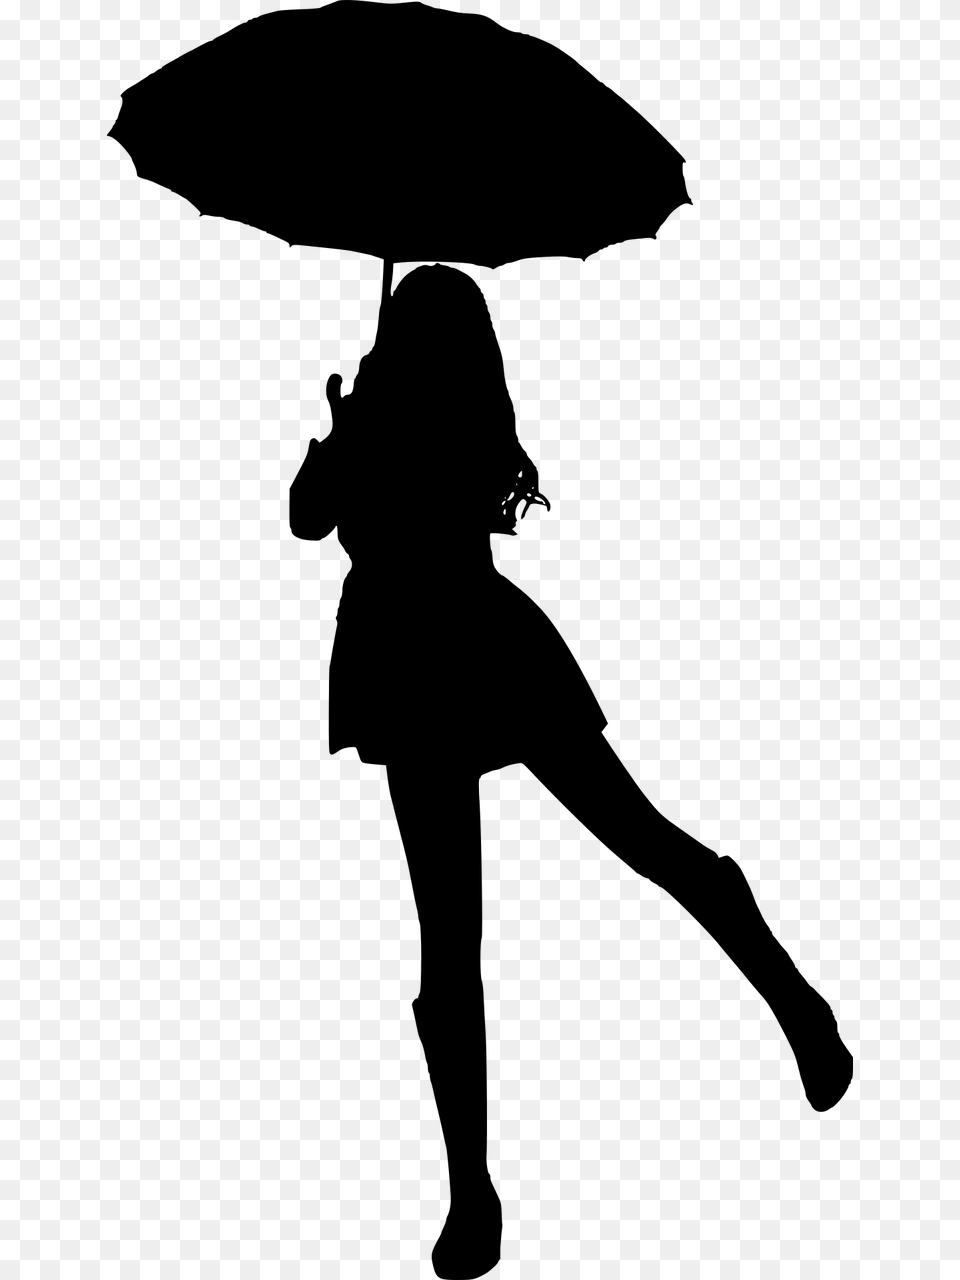 Silueta Mujer Silhouette Of Woman With Umbrella, Gray Free Transparent Png